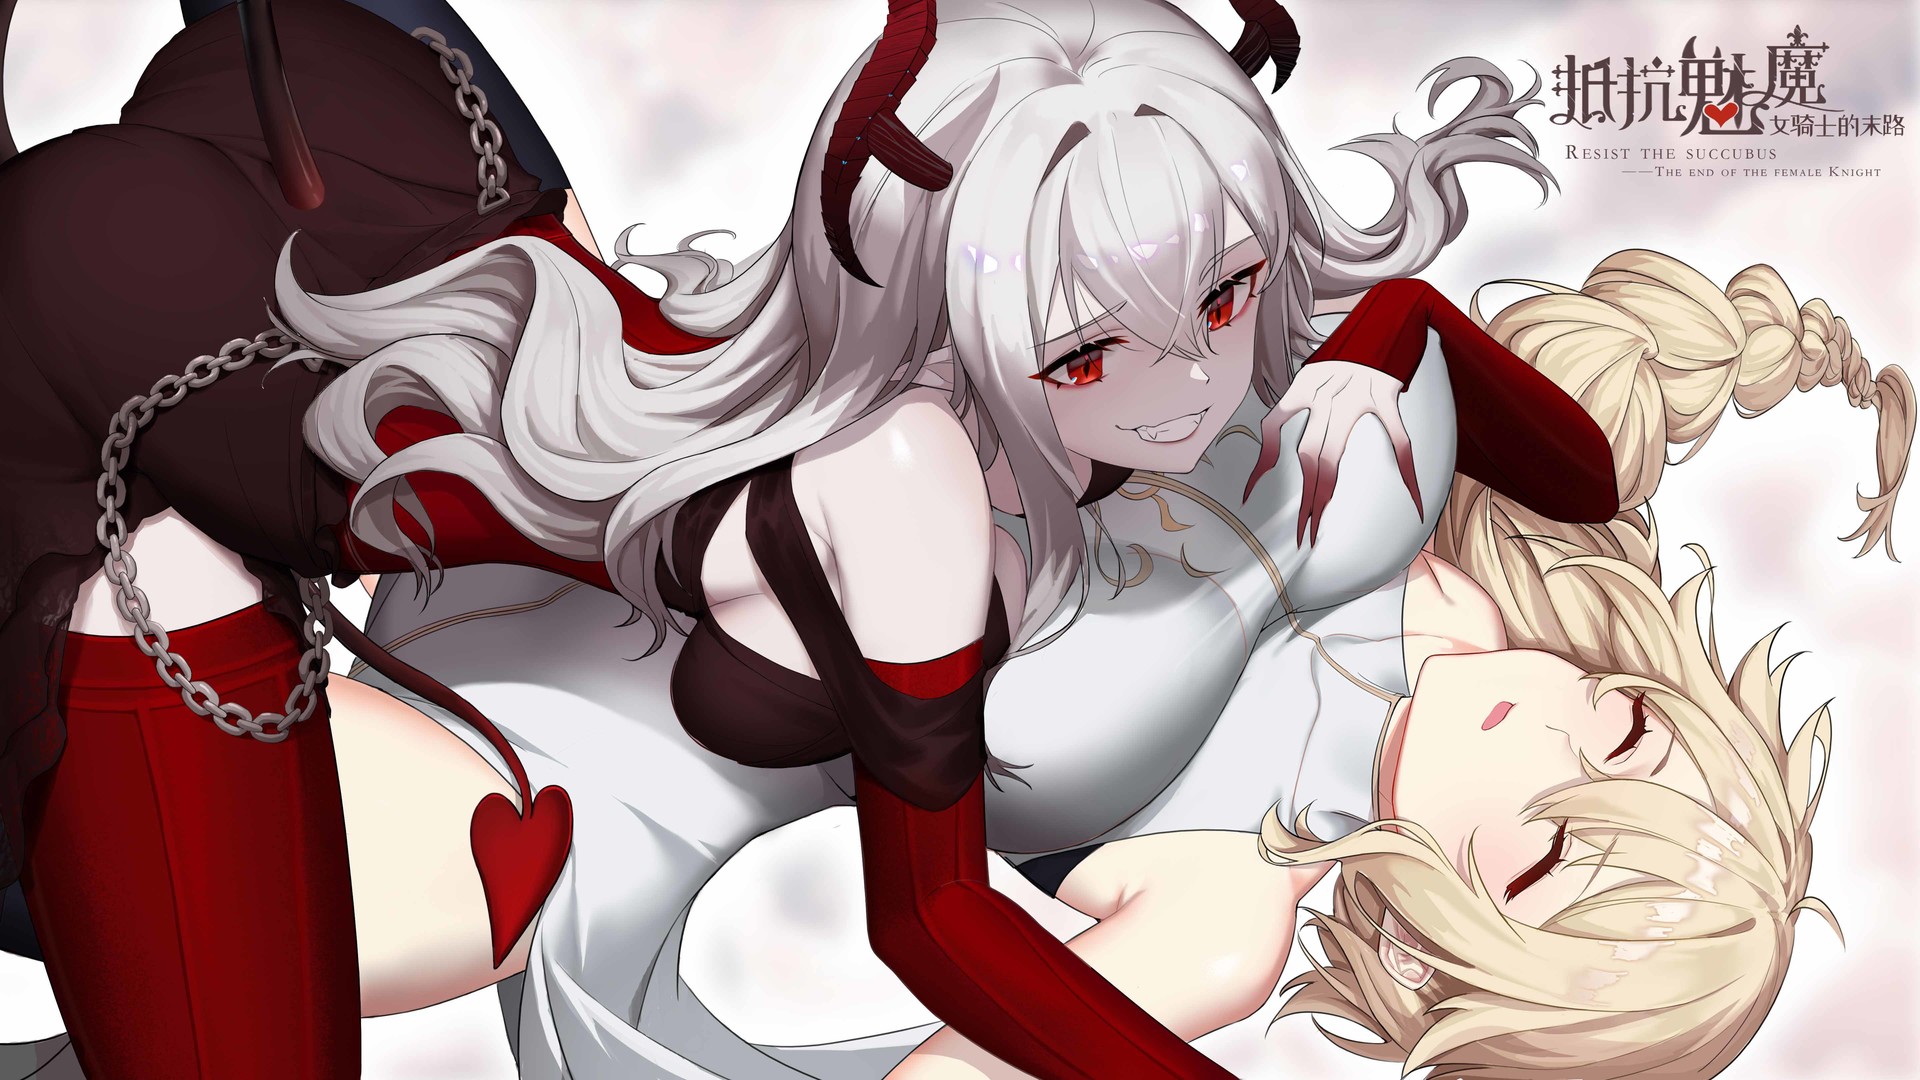 Hentai 3d Teen Sex - Resist the succubusâ€”The end of the female Knight on Steam